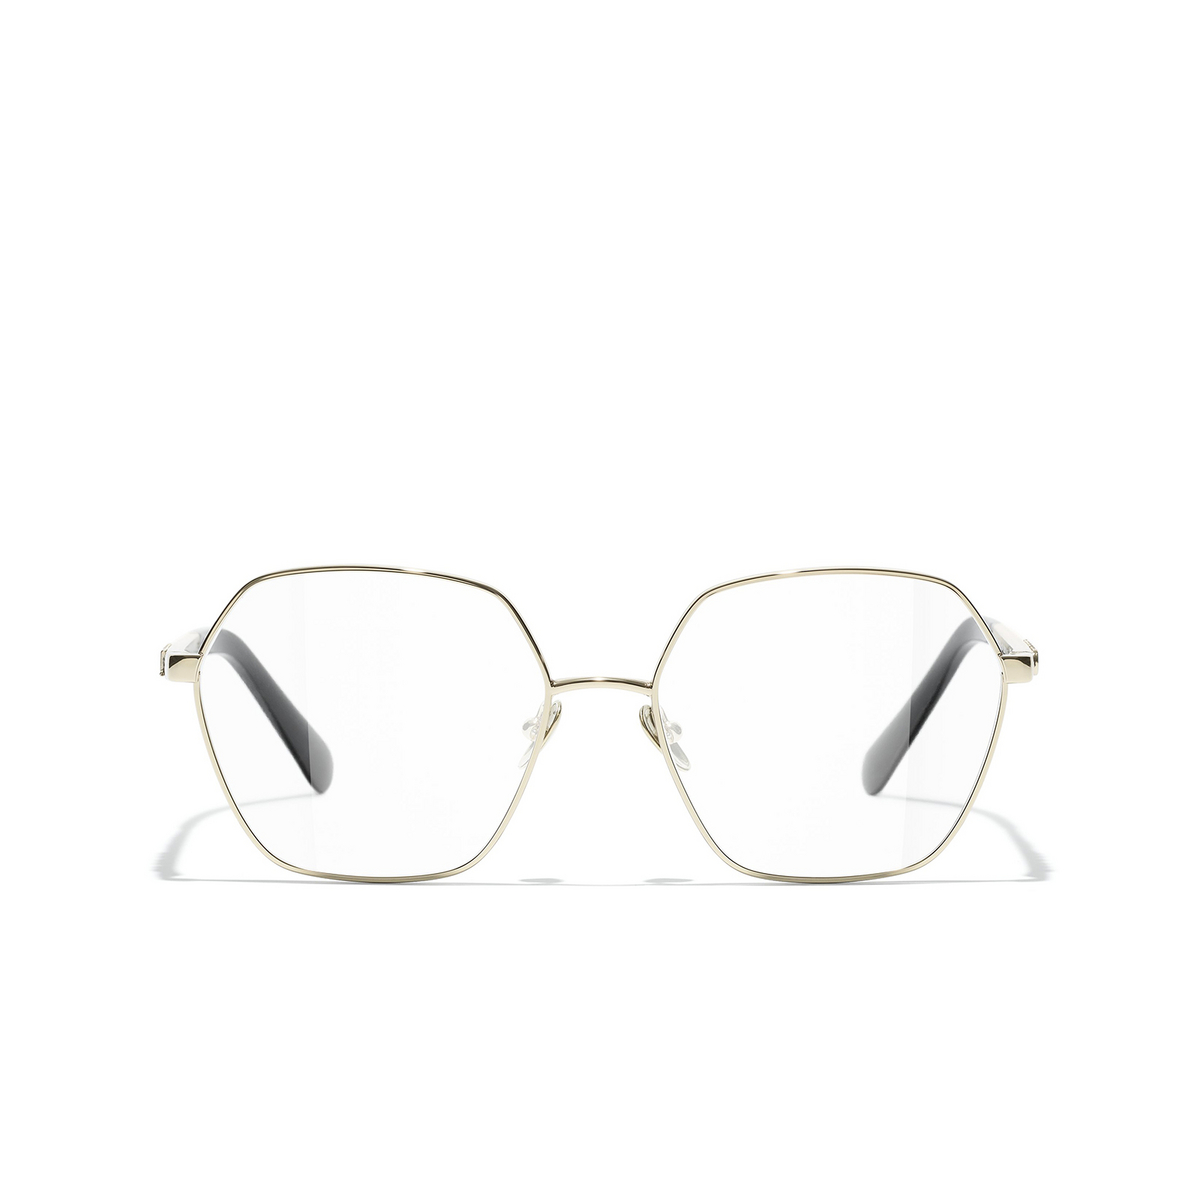 CHANEL round Eyeglasses C134 Gold - front view